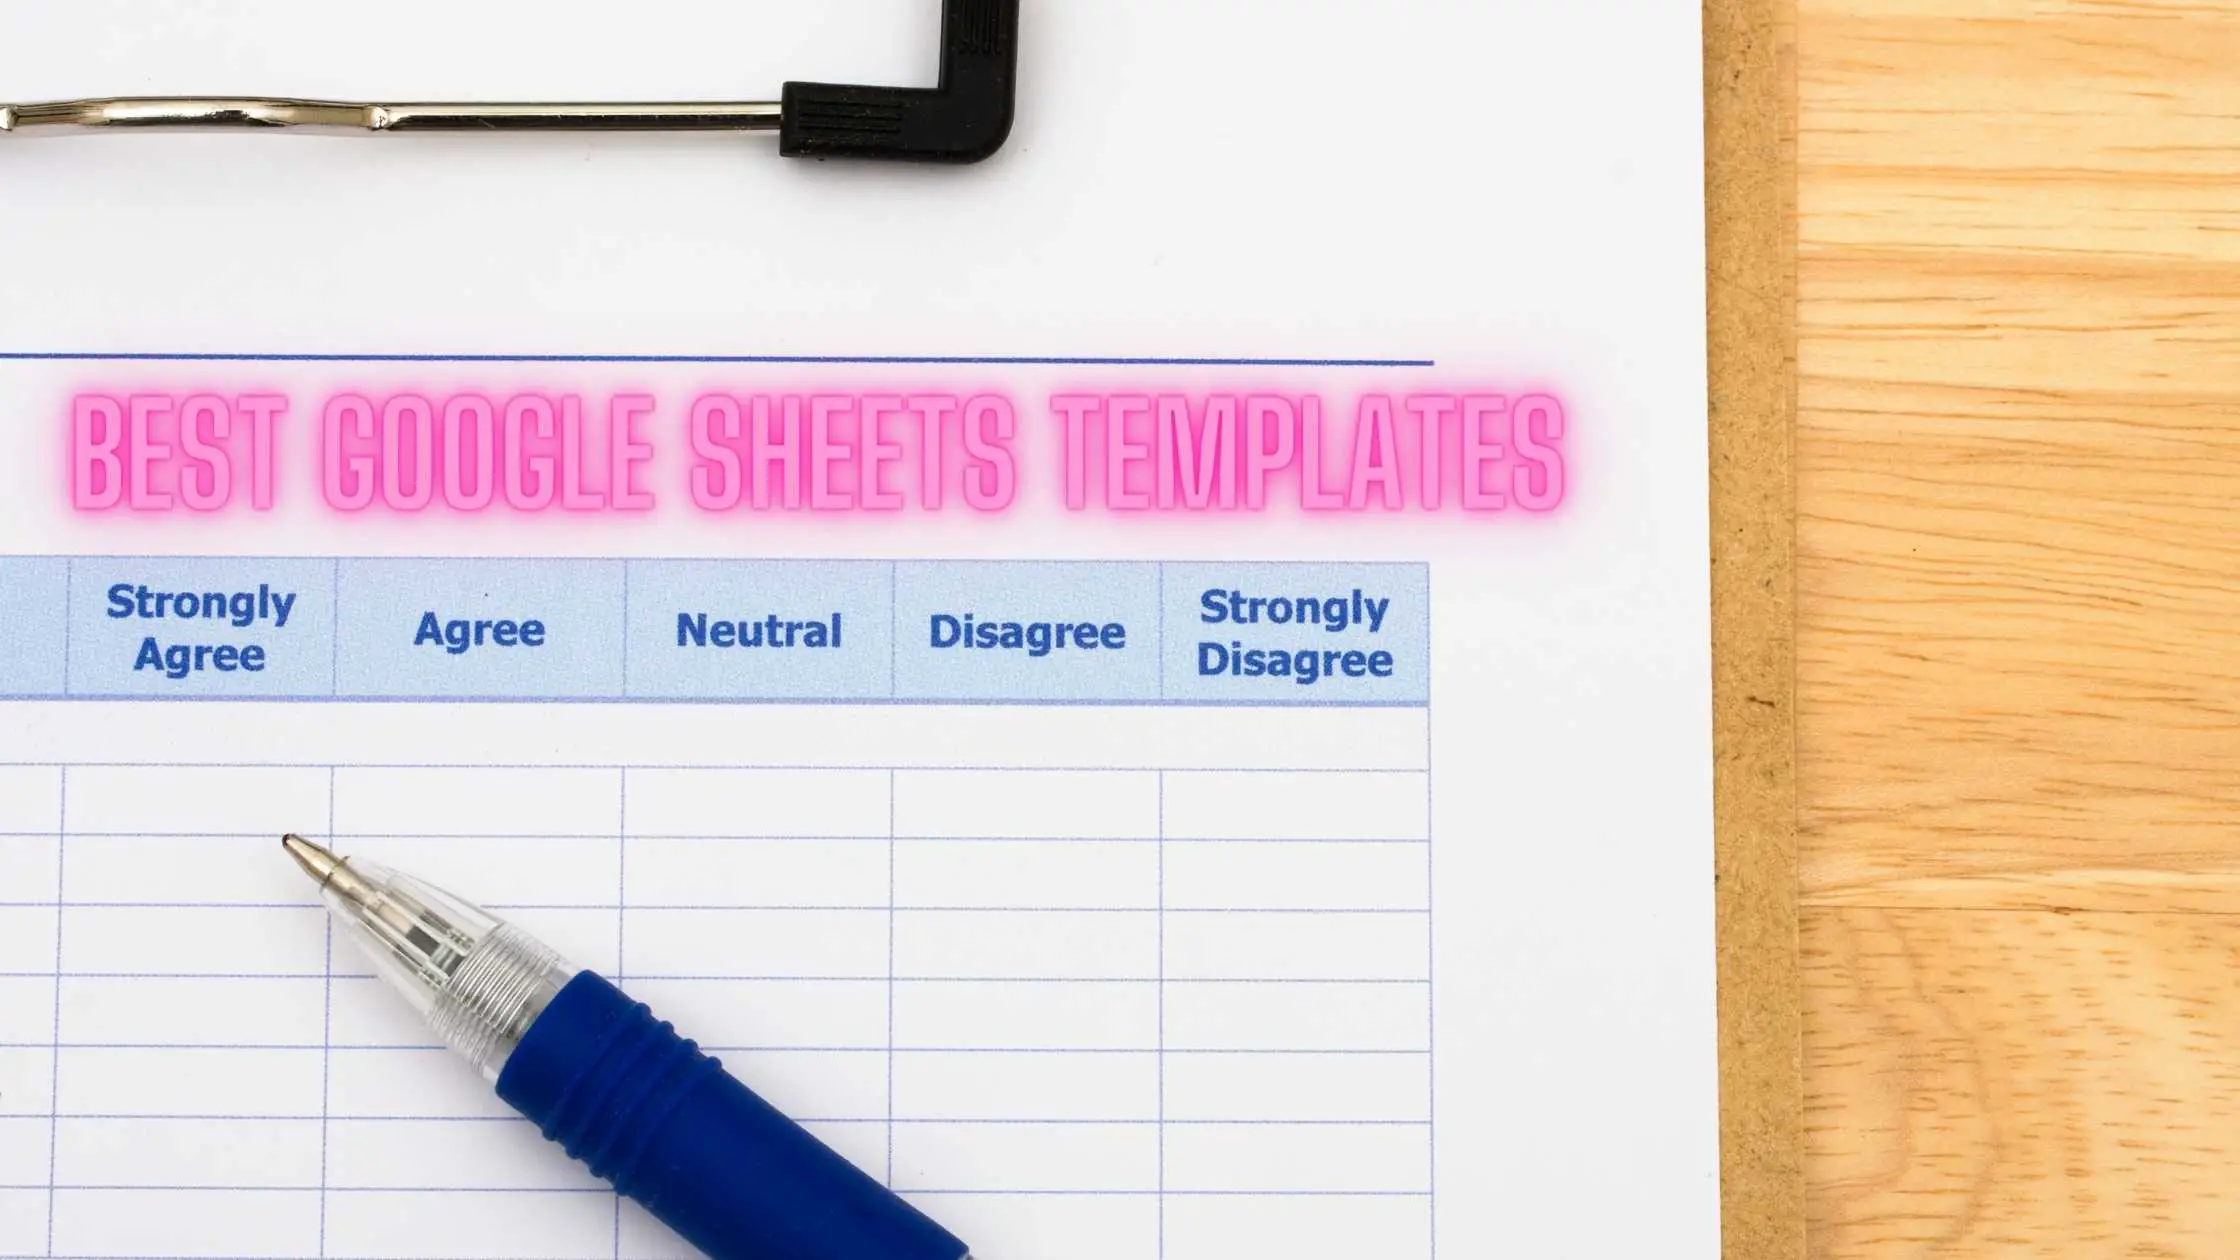 15 of The Best Google Sheets Templates in 2020 Reviewed 🤴